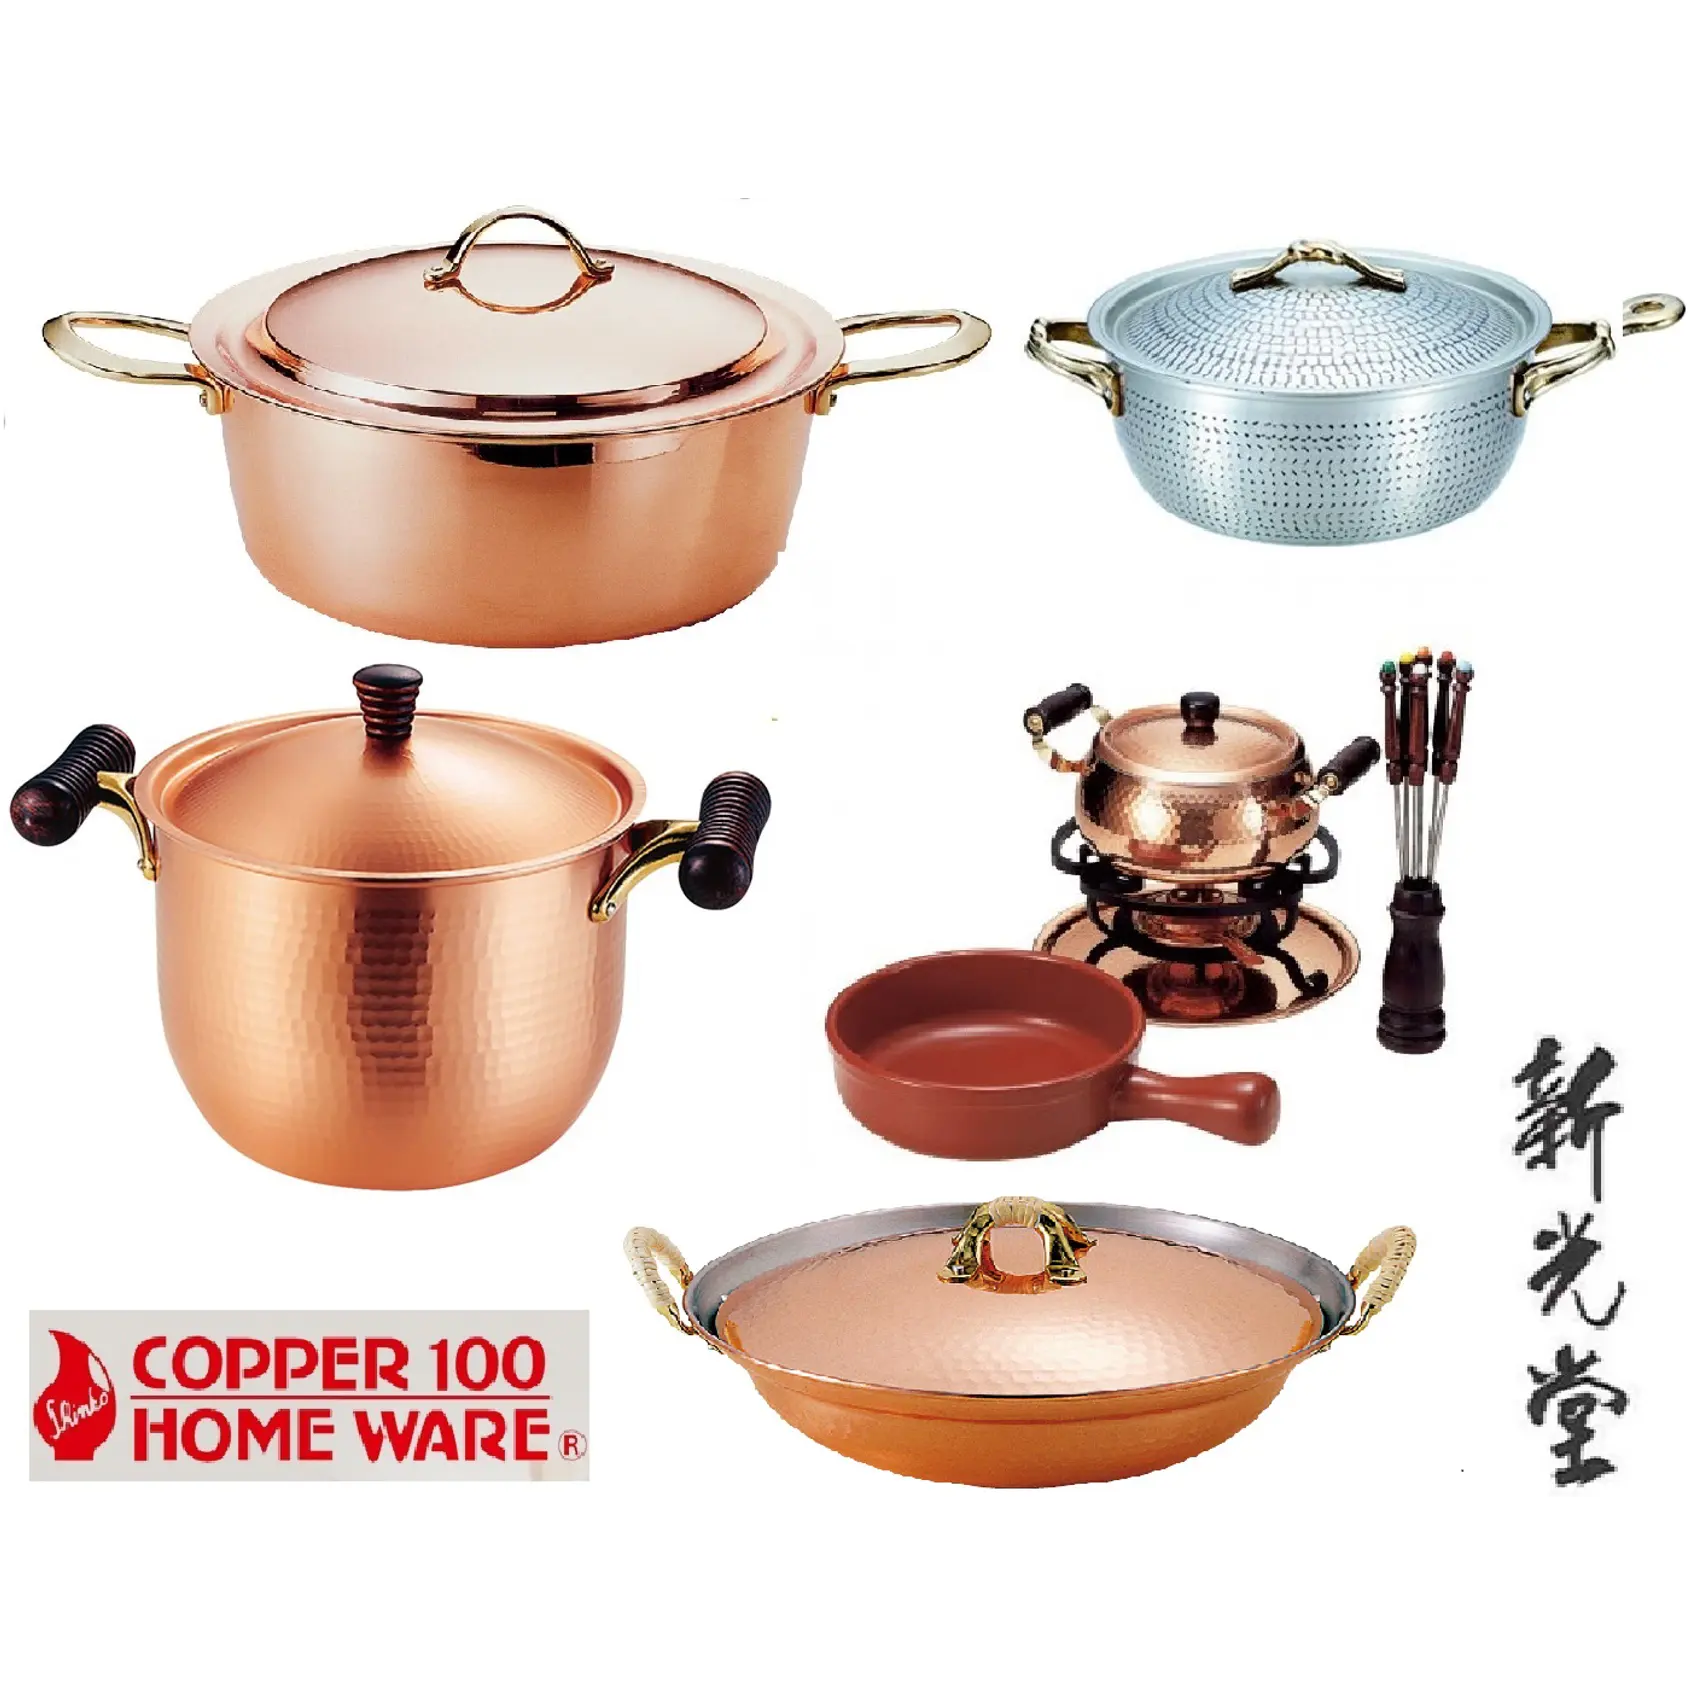 Excellent thermal conductivity copper cookware sets with the Good Design Award